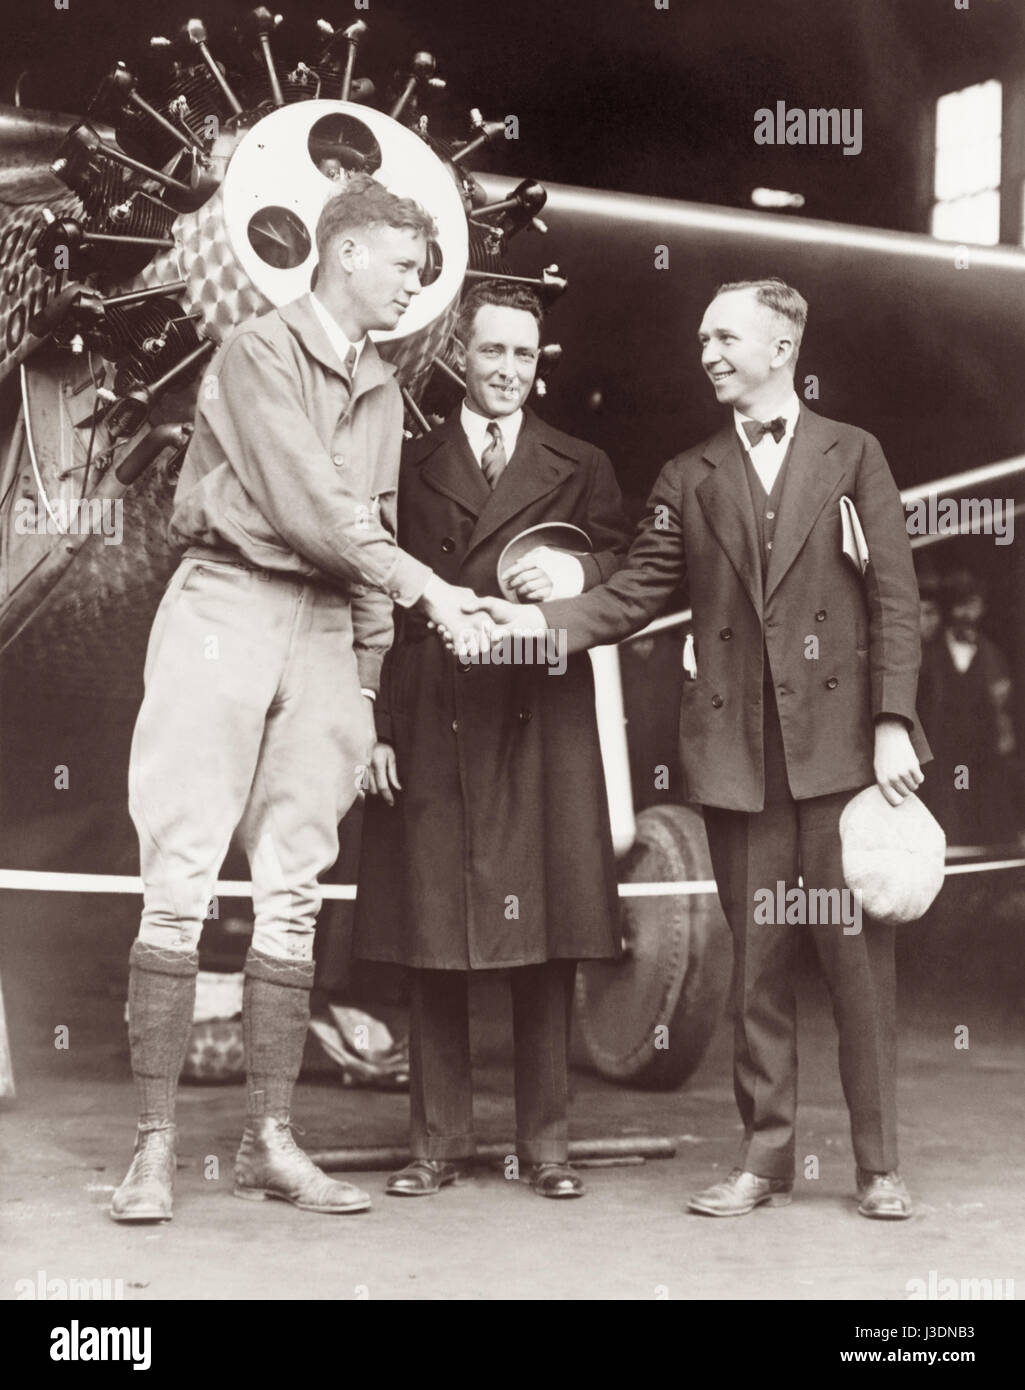 Rival aviators Charles Lindbergh and Clarence Chamberlin shaking hands in front of Lindbergh's Spirit of St. Louis airplane, with famed explorer and pilot Richard Byrd standing between them, in May, 1927 prior to competing attempts to complete the first transatlantic flight. Stock Photo